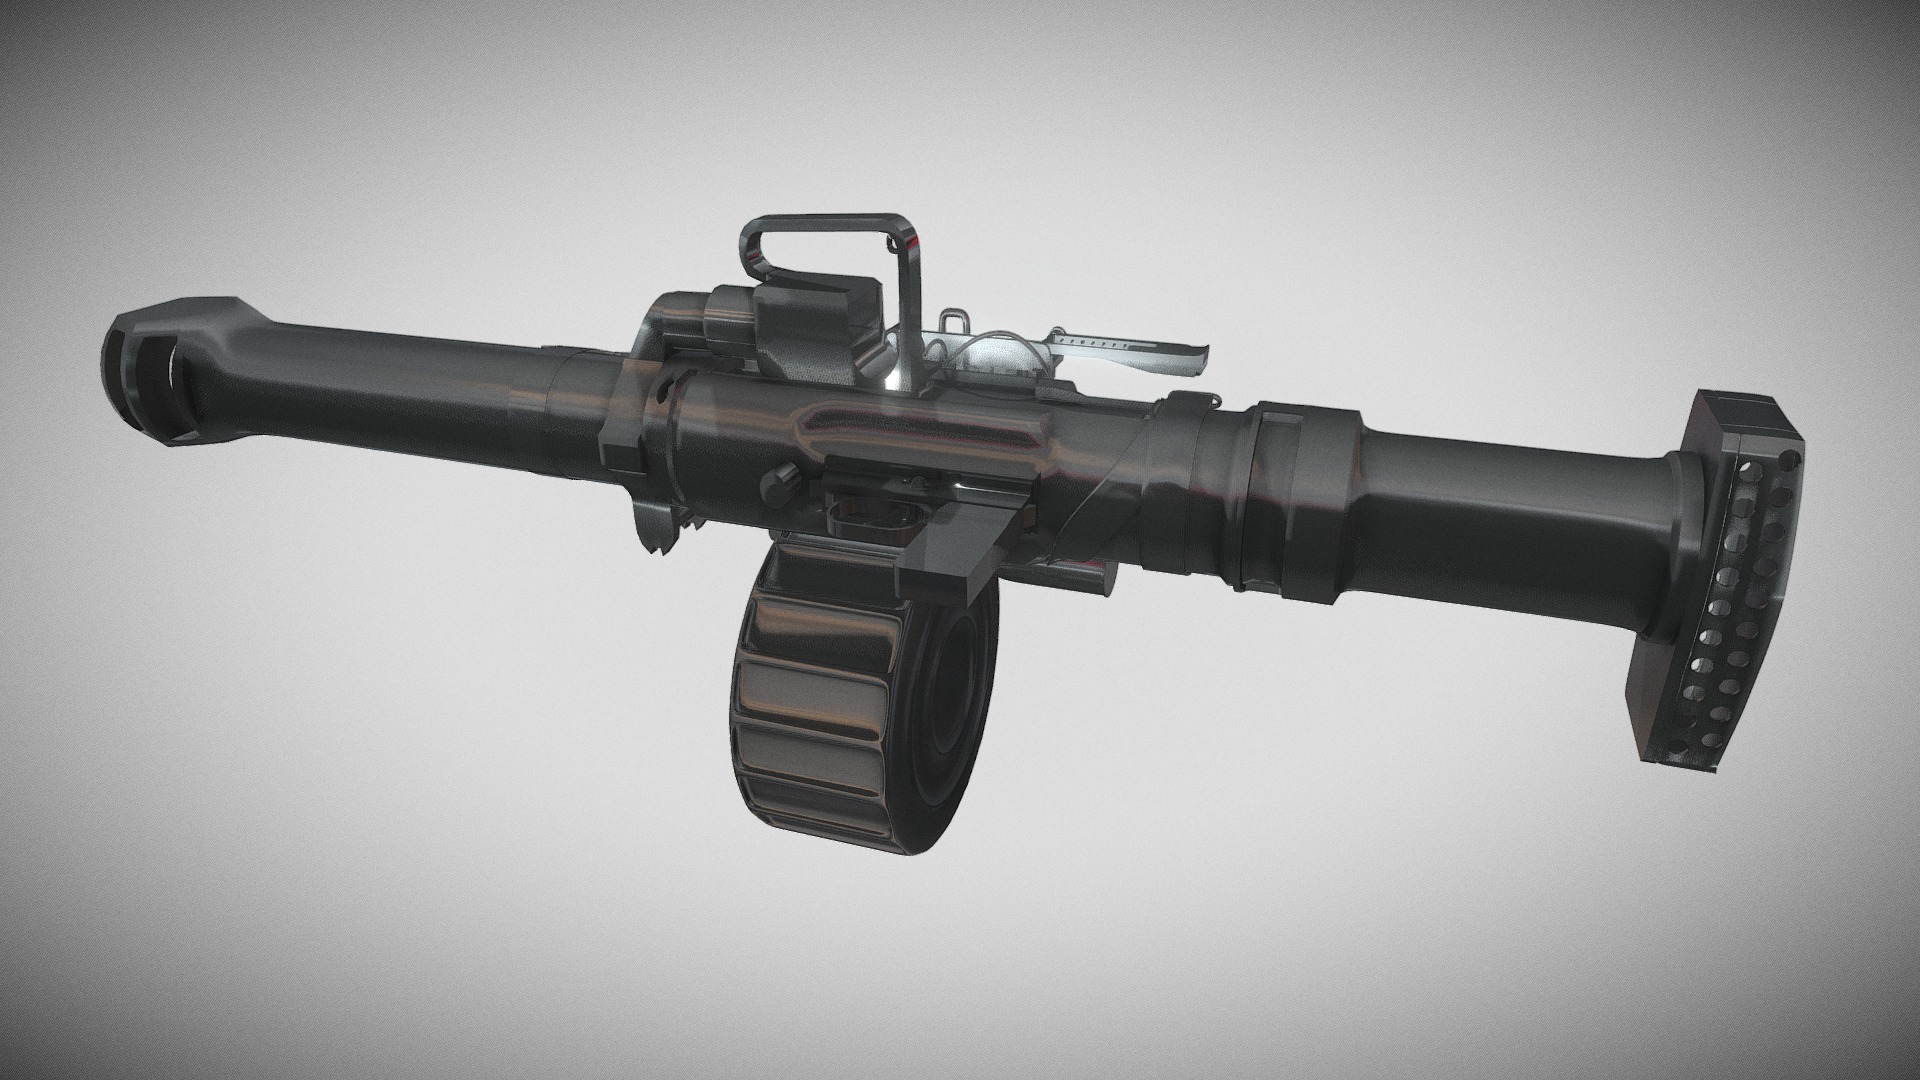 3D model QLZ - This is a 3D model of the QLZ. The 3D model is about a black gun with a scope.